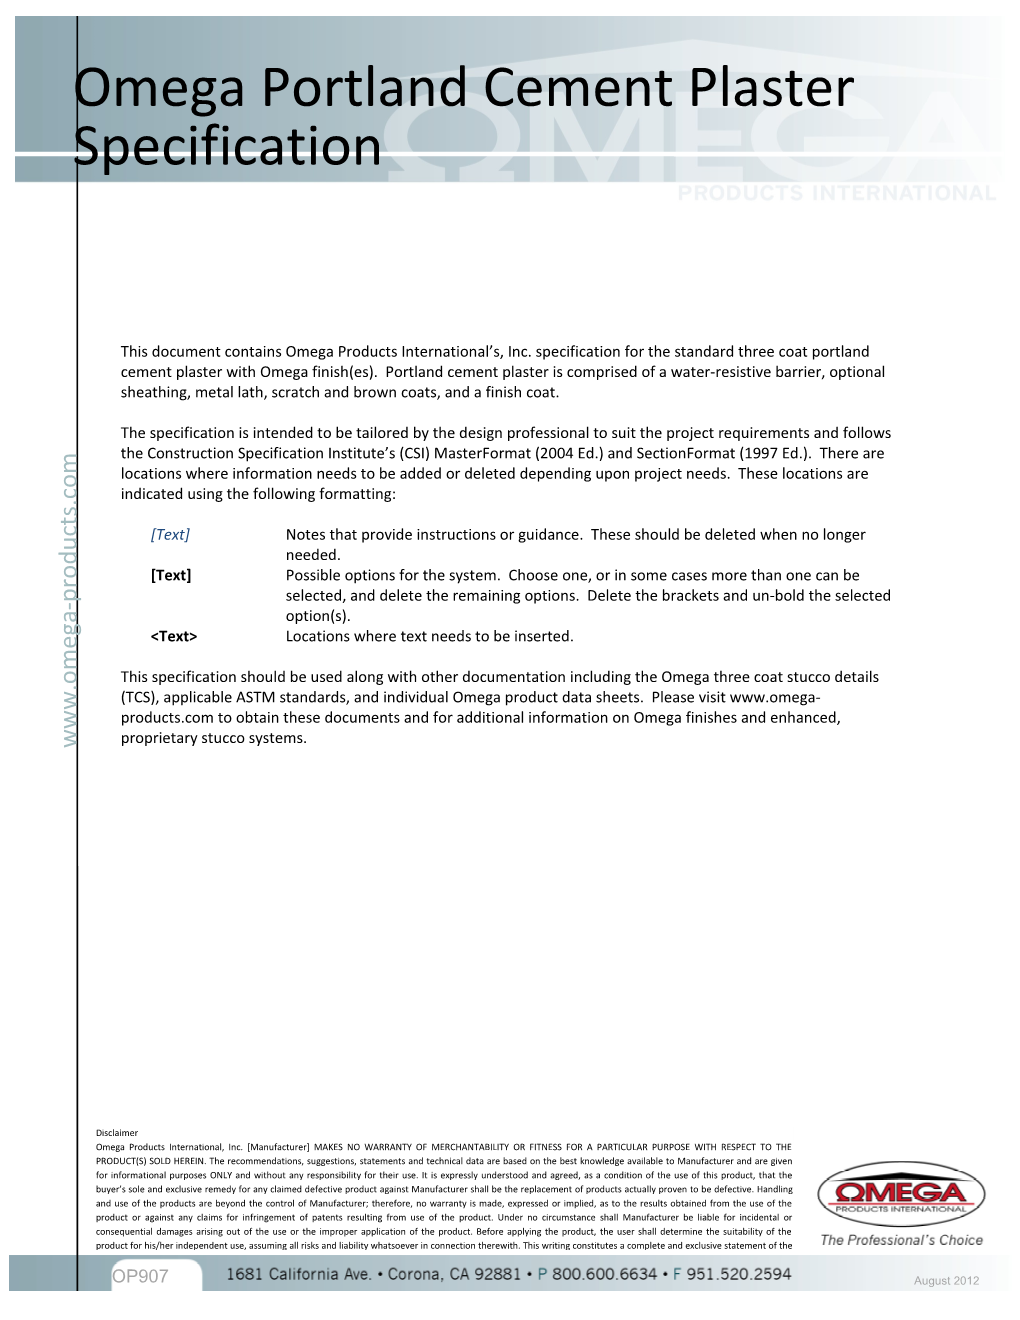 This Document Contains Omega Products International S, Inc. Specification for the Standard